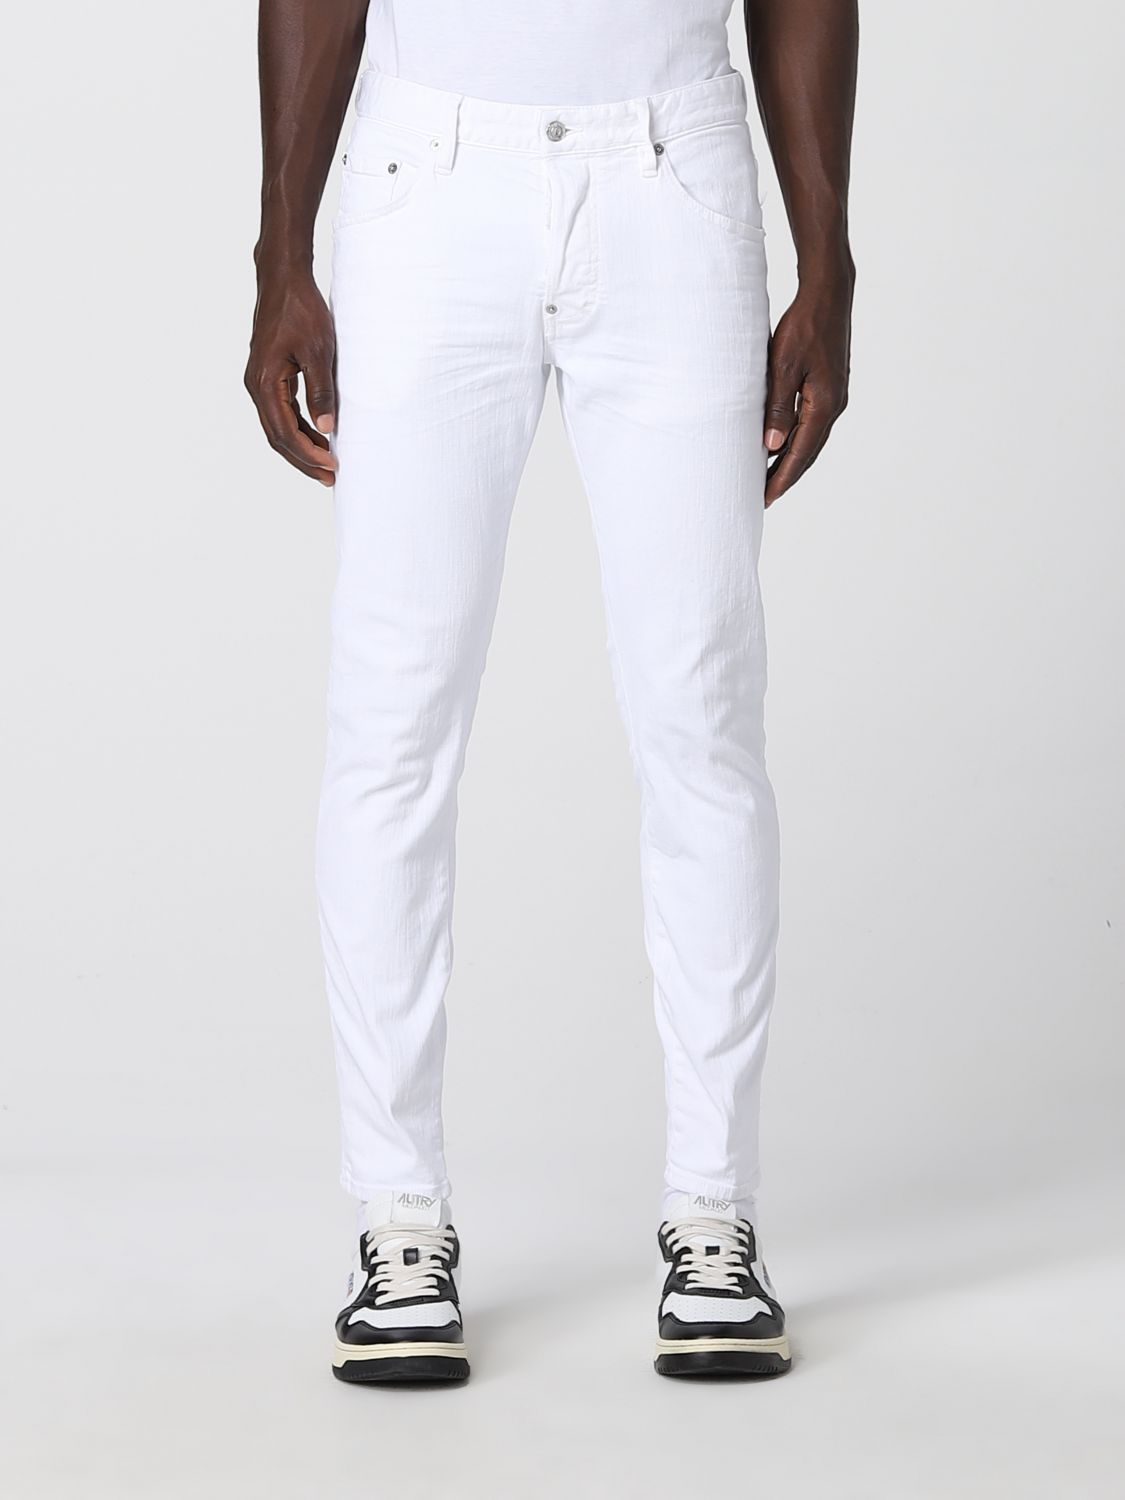 DSQUARED2: Bull slim fit jeans - White | Dsquared2 jeans ...